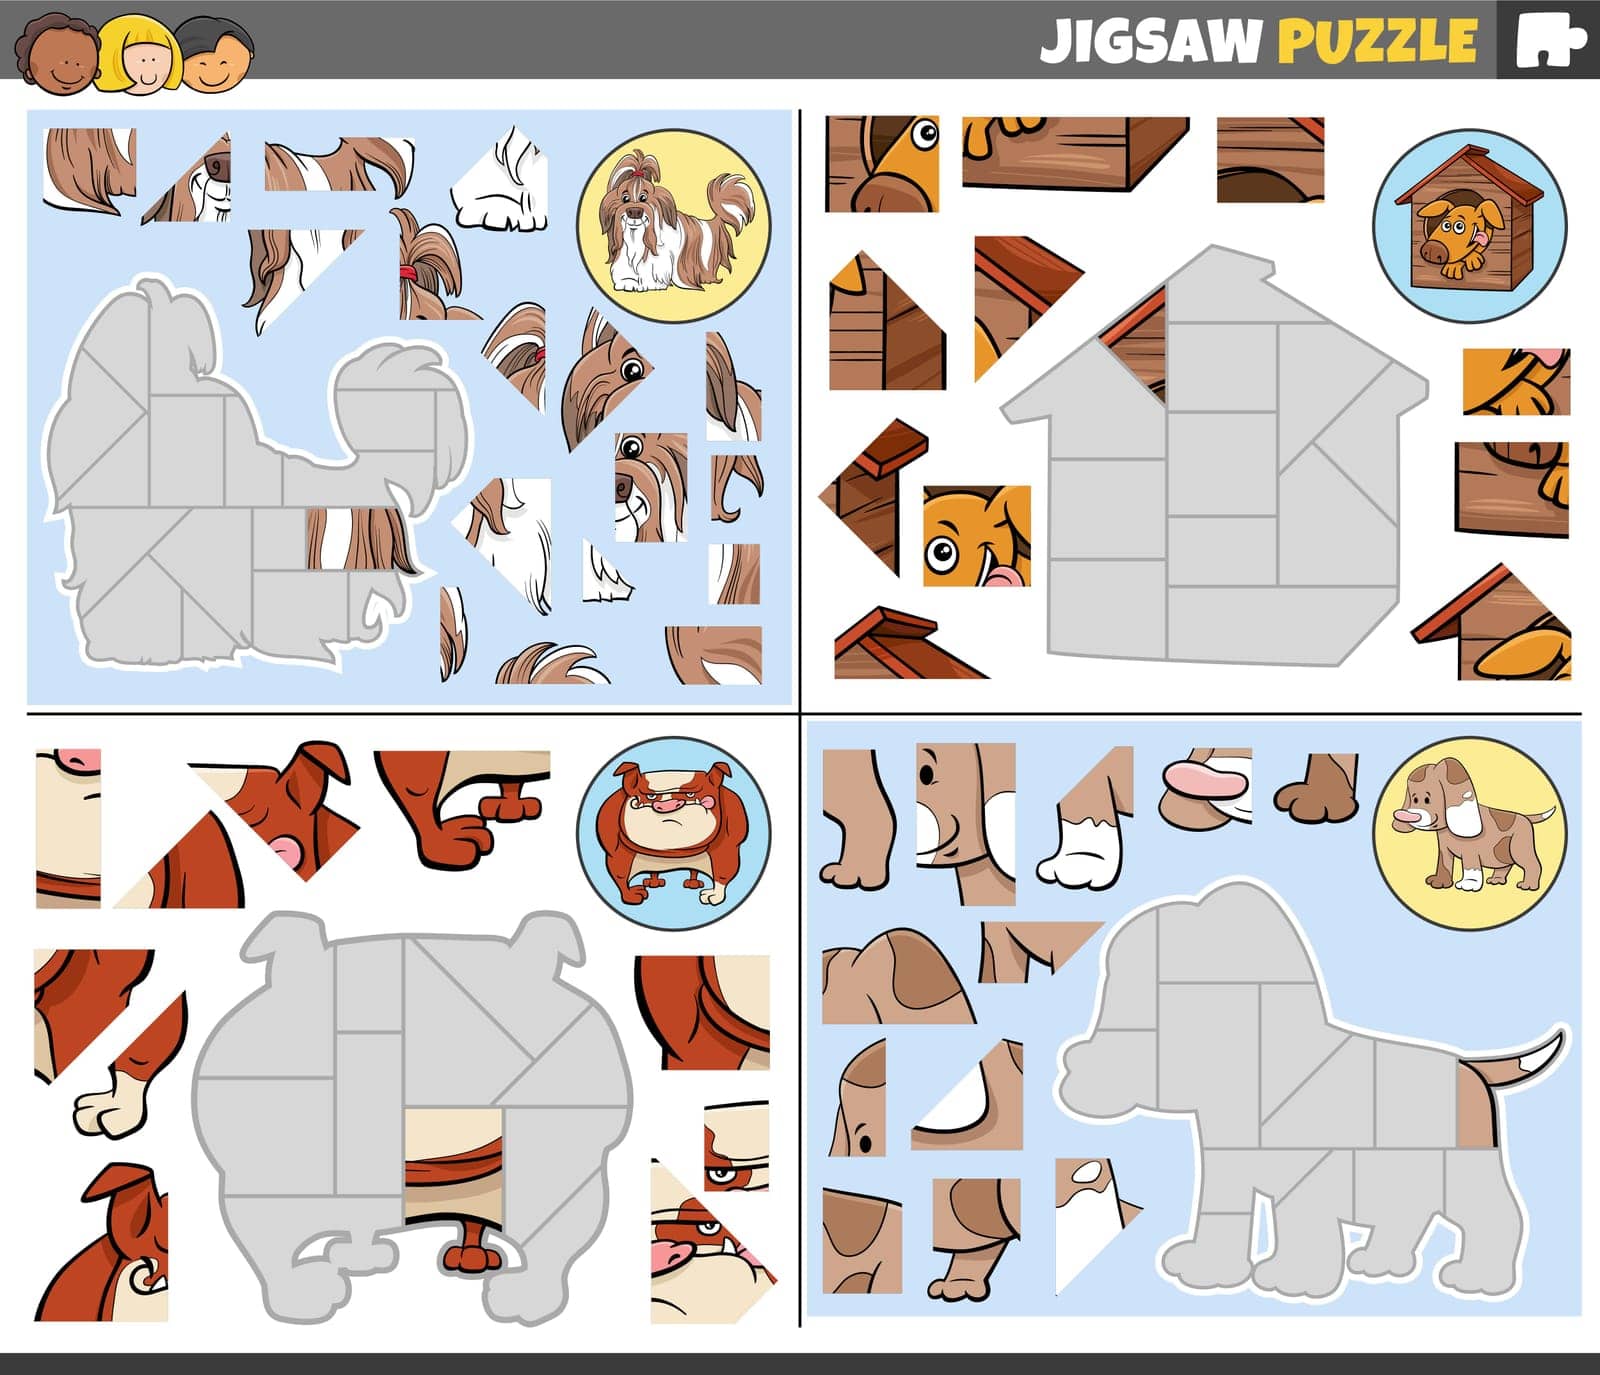 jigsaw puzzle games set with funny cartoon dogs characters by izakowski